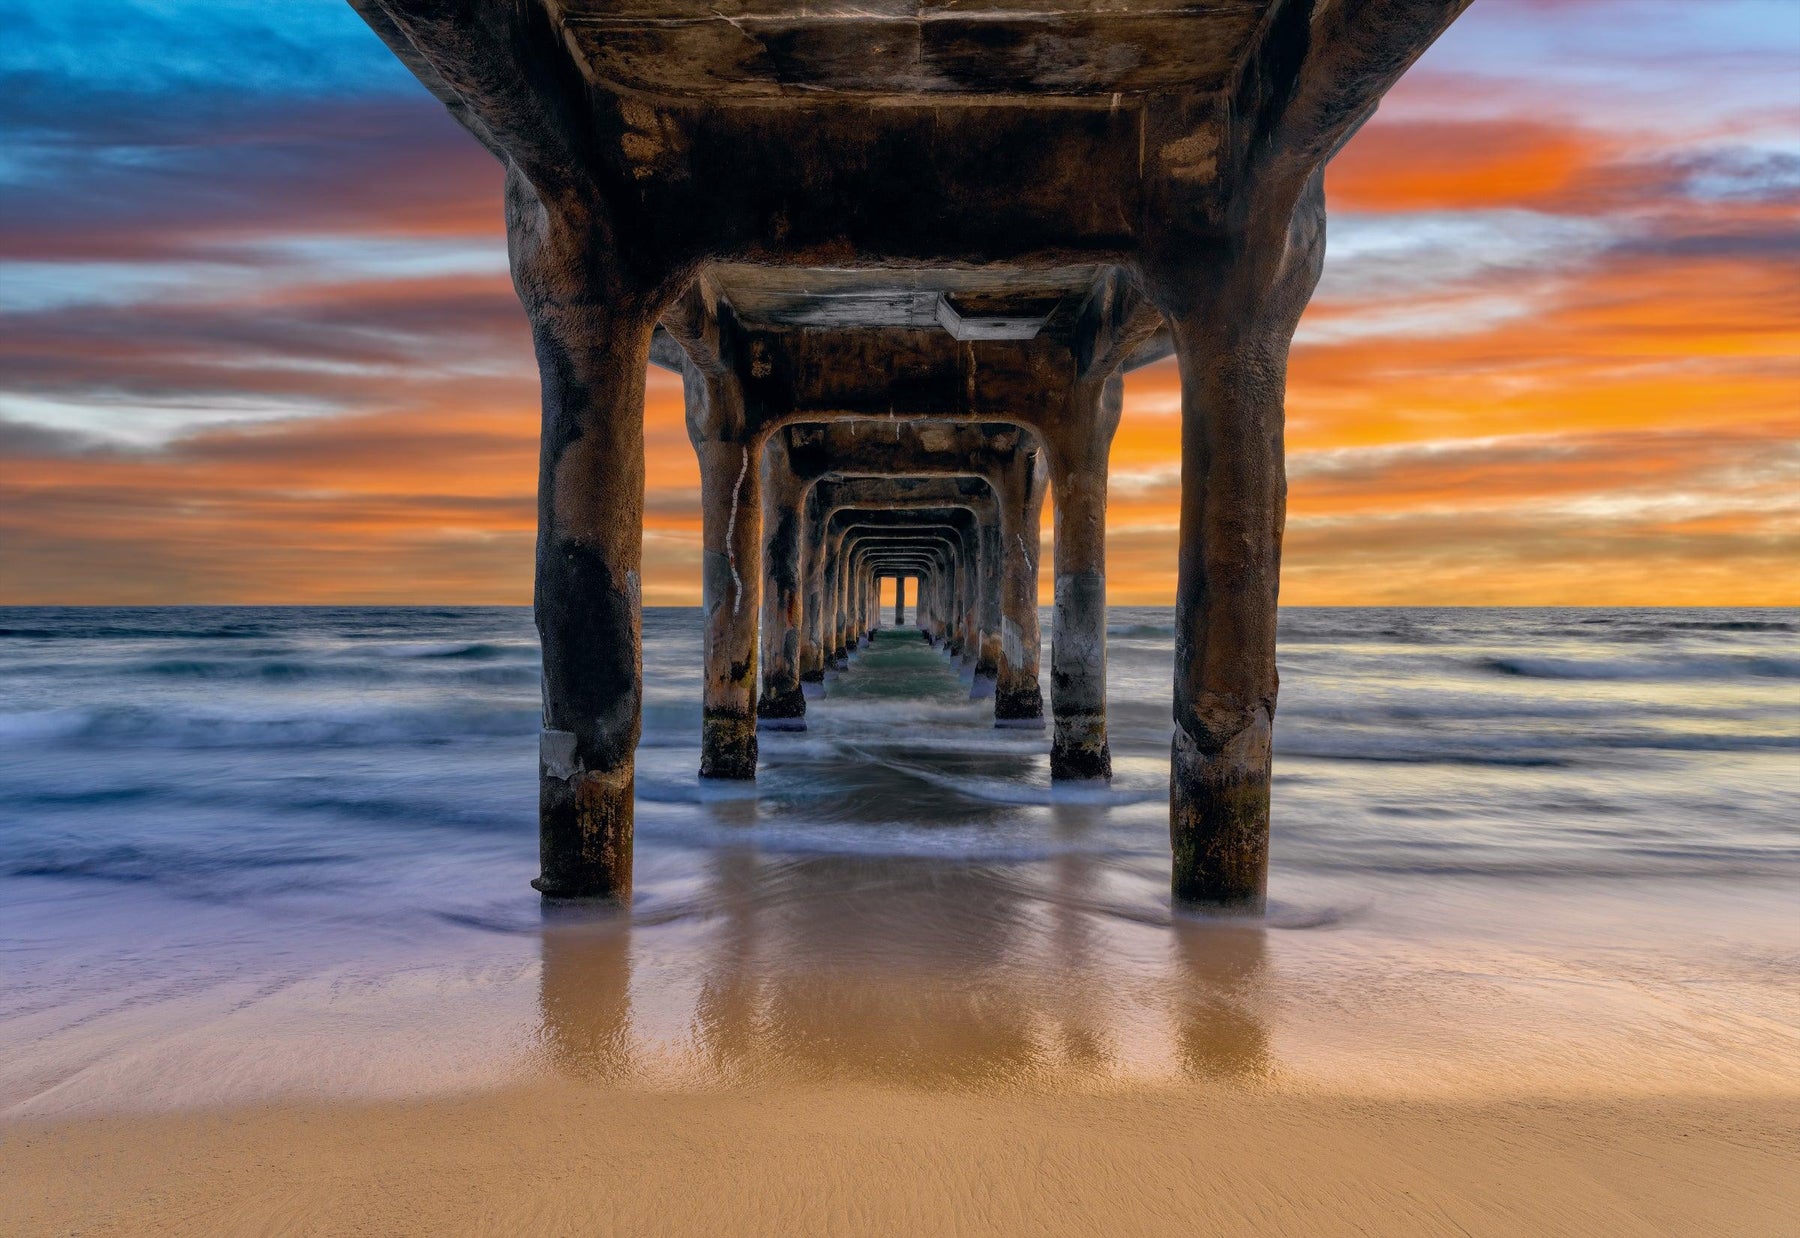 Waves crashing under a pier and onto the sand during a cloudy sunset